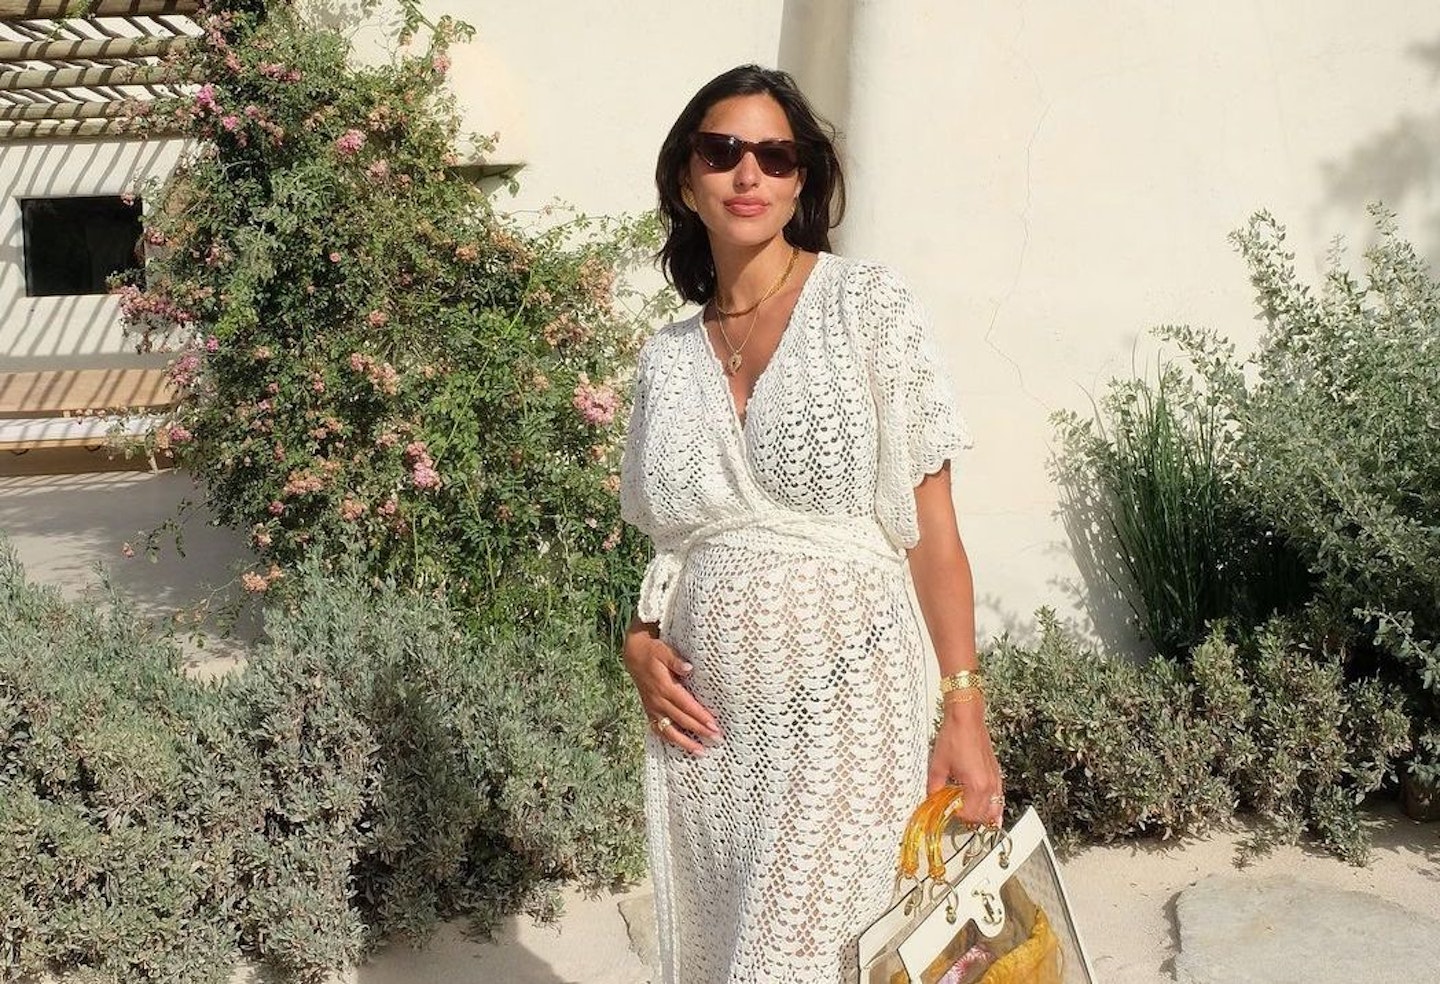 Maternity Dresses: 7 Cute Summer Outfit Ideas - The Mom Edit